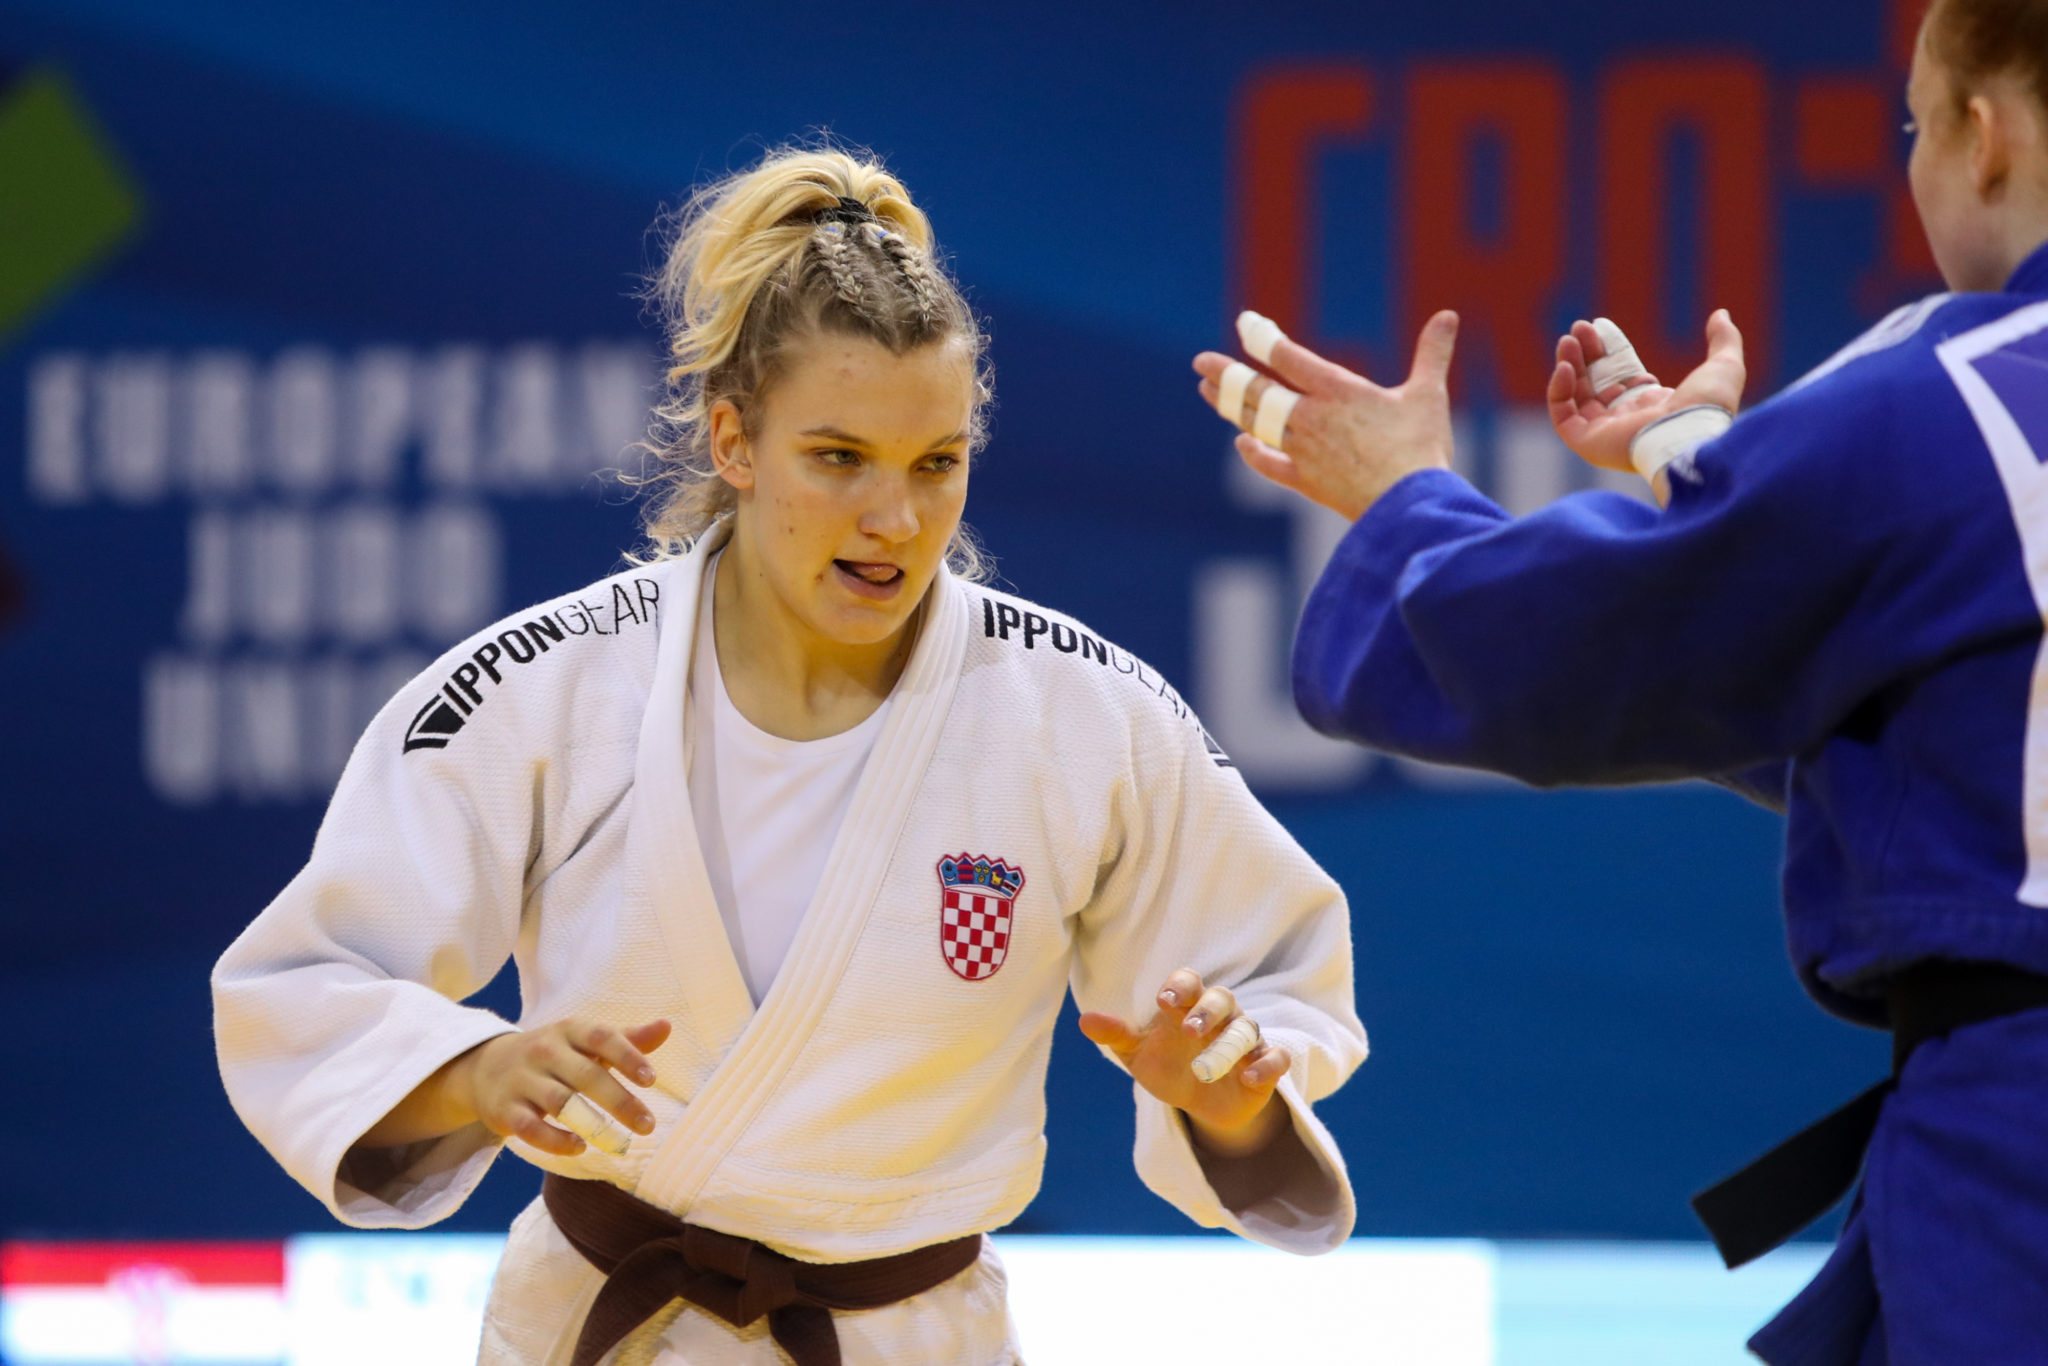 CROATIA DELIGHTED WITH UNEXPECTED GOLD FROM CVJETKO